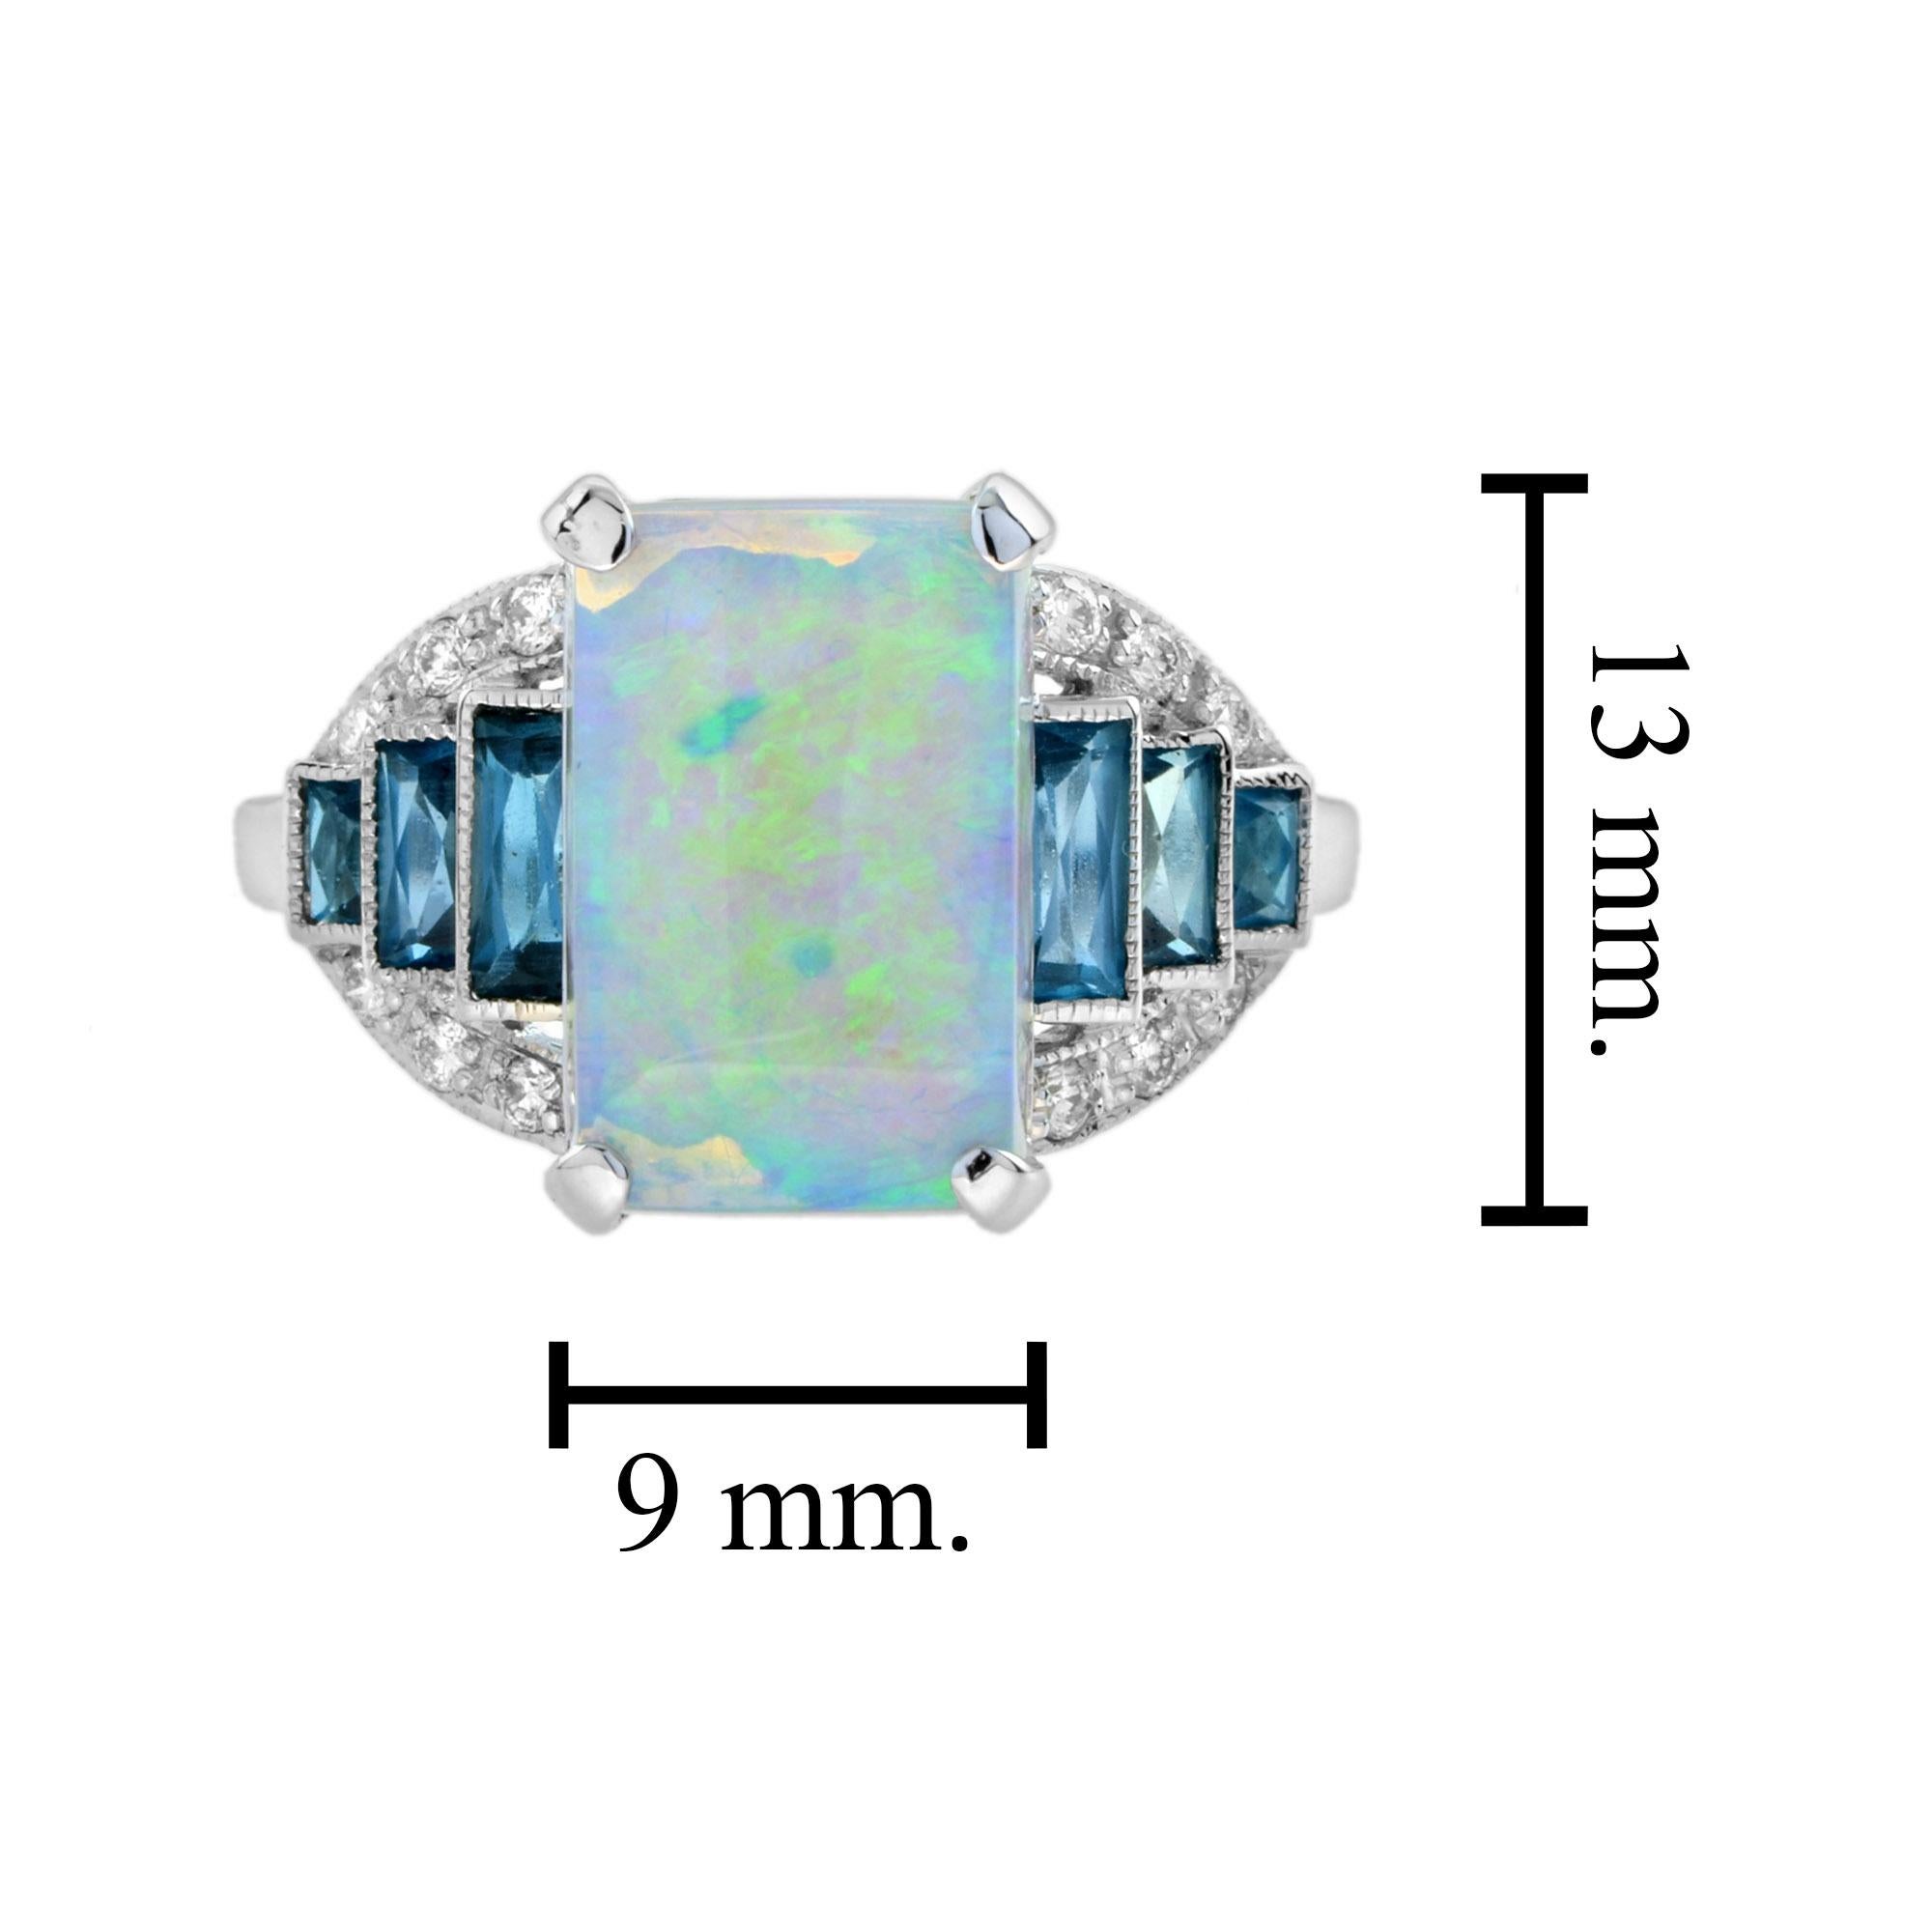 Emerald Cut Opal with London Blue Topaz and Diamond Art Deco Style Ring in 14K White Gold